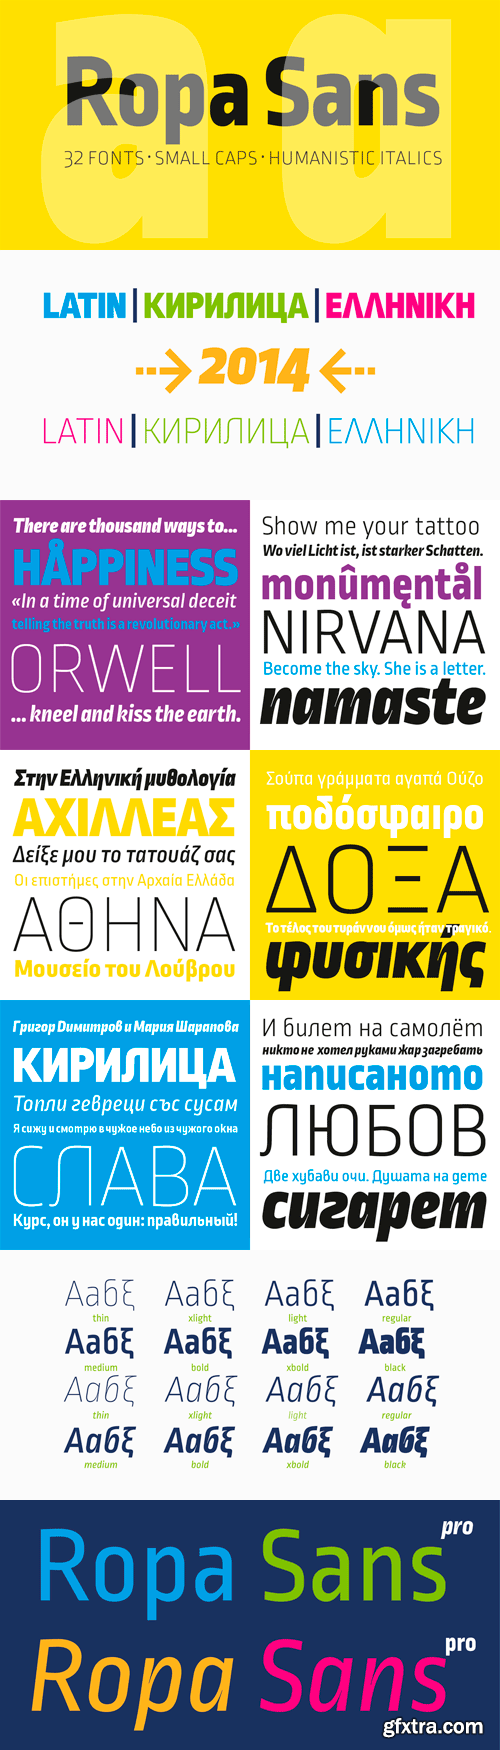 Ropa Sans Pro Font Family - 32 Fonts for $300